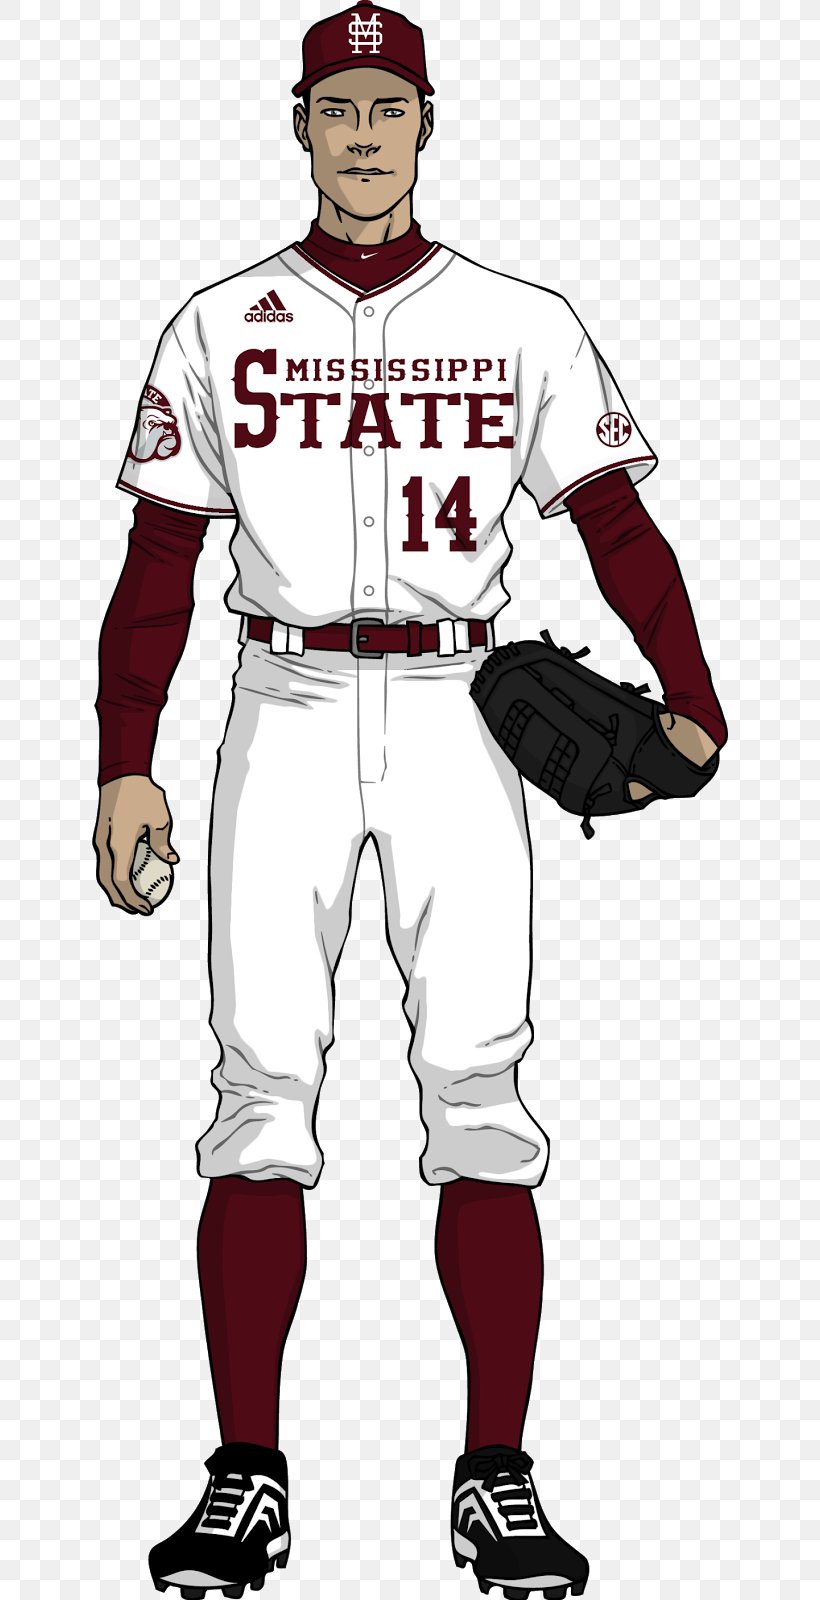 Ole Miss Rebels Baseball Mississippi State Bulldogs Football Mississippi State University Southeastern Conference Mississippi State Bulldogs Baseball, PNG, 636x1600px, Ole Miss Rebels Baseball, Baseball, Baseball Equipment, Baseball Player, Baseball Positions Download Free